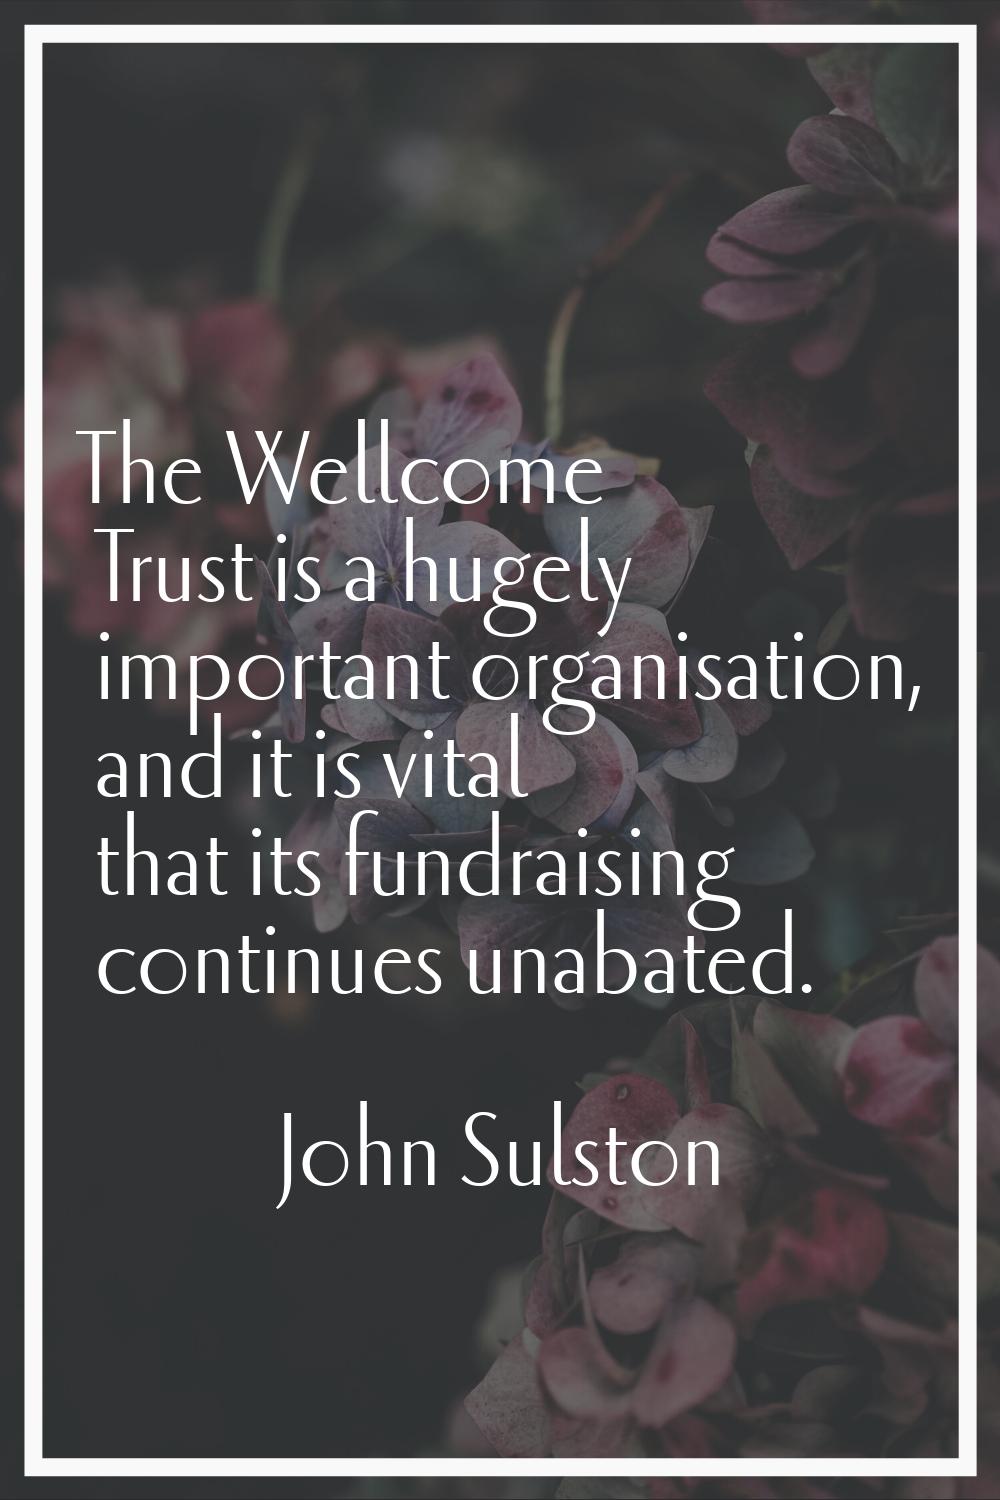 The Wellcome Trust is a hugely important organisation, and it is vital that its fundraising continu